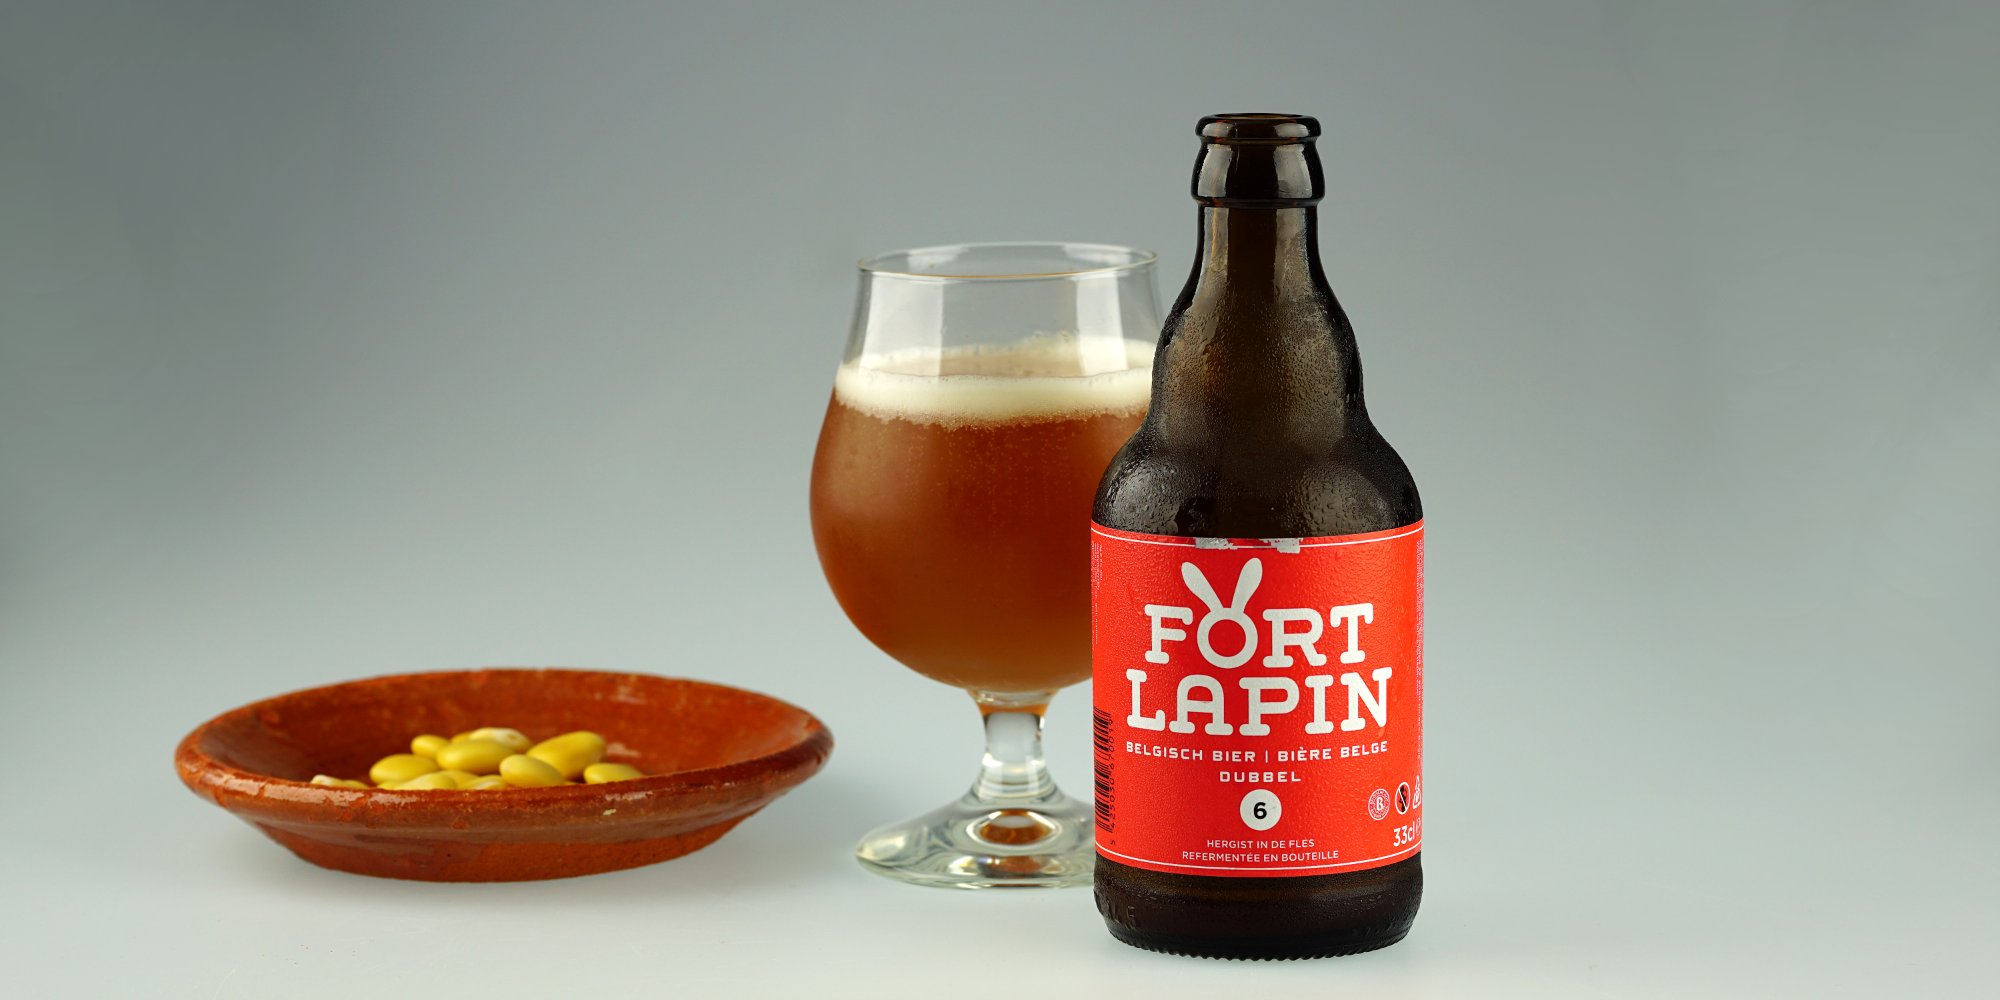 Fort Lapin Dubbel (6)